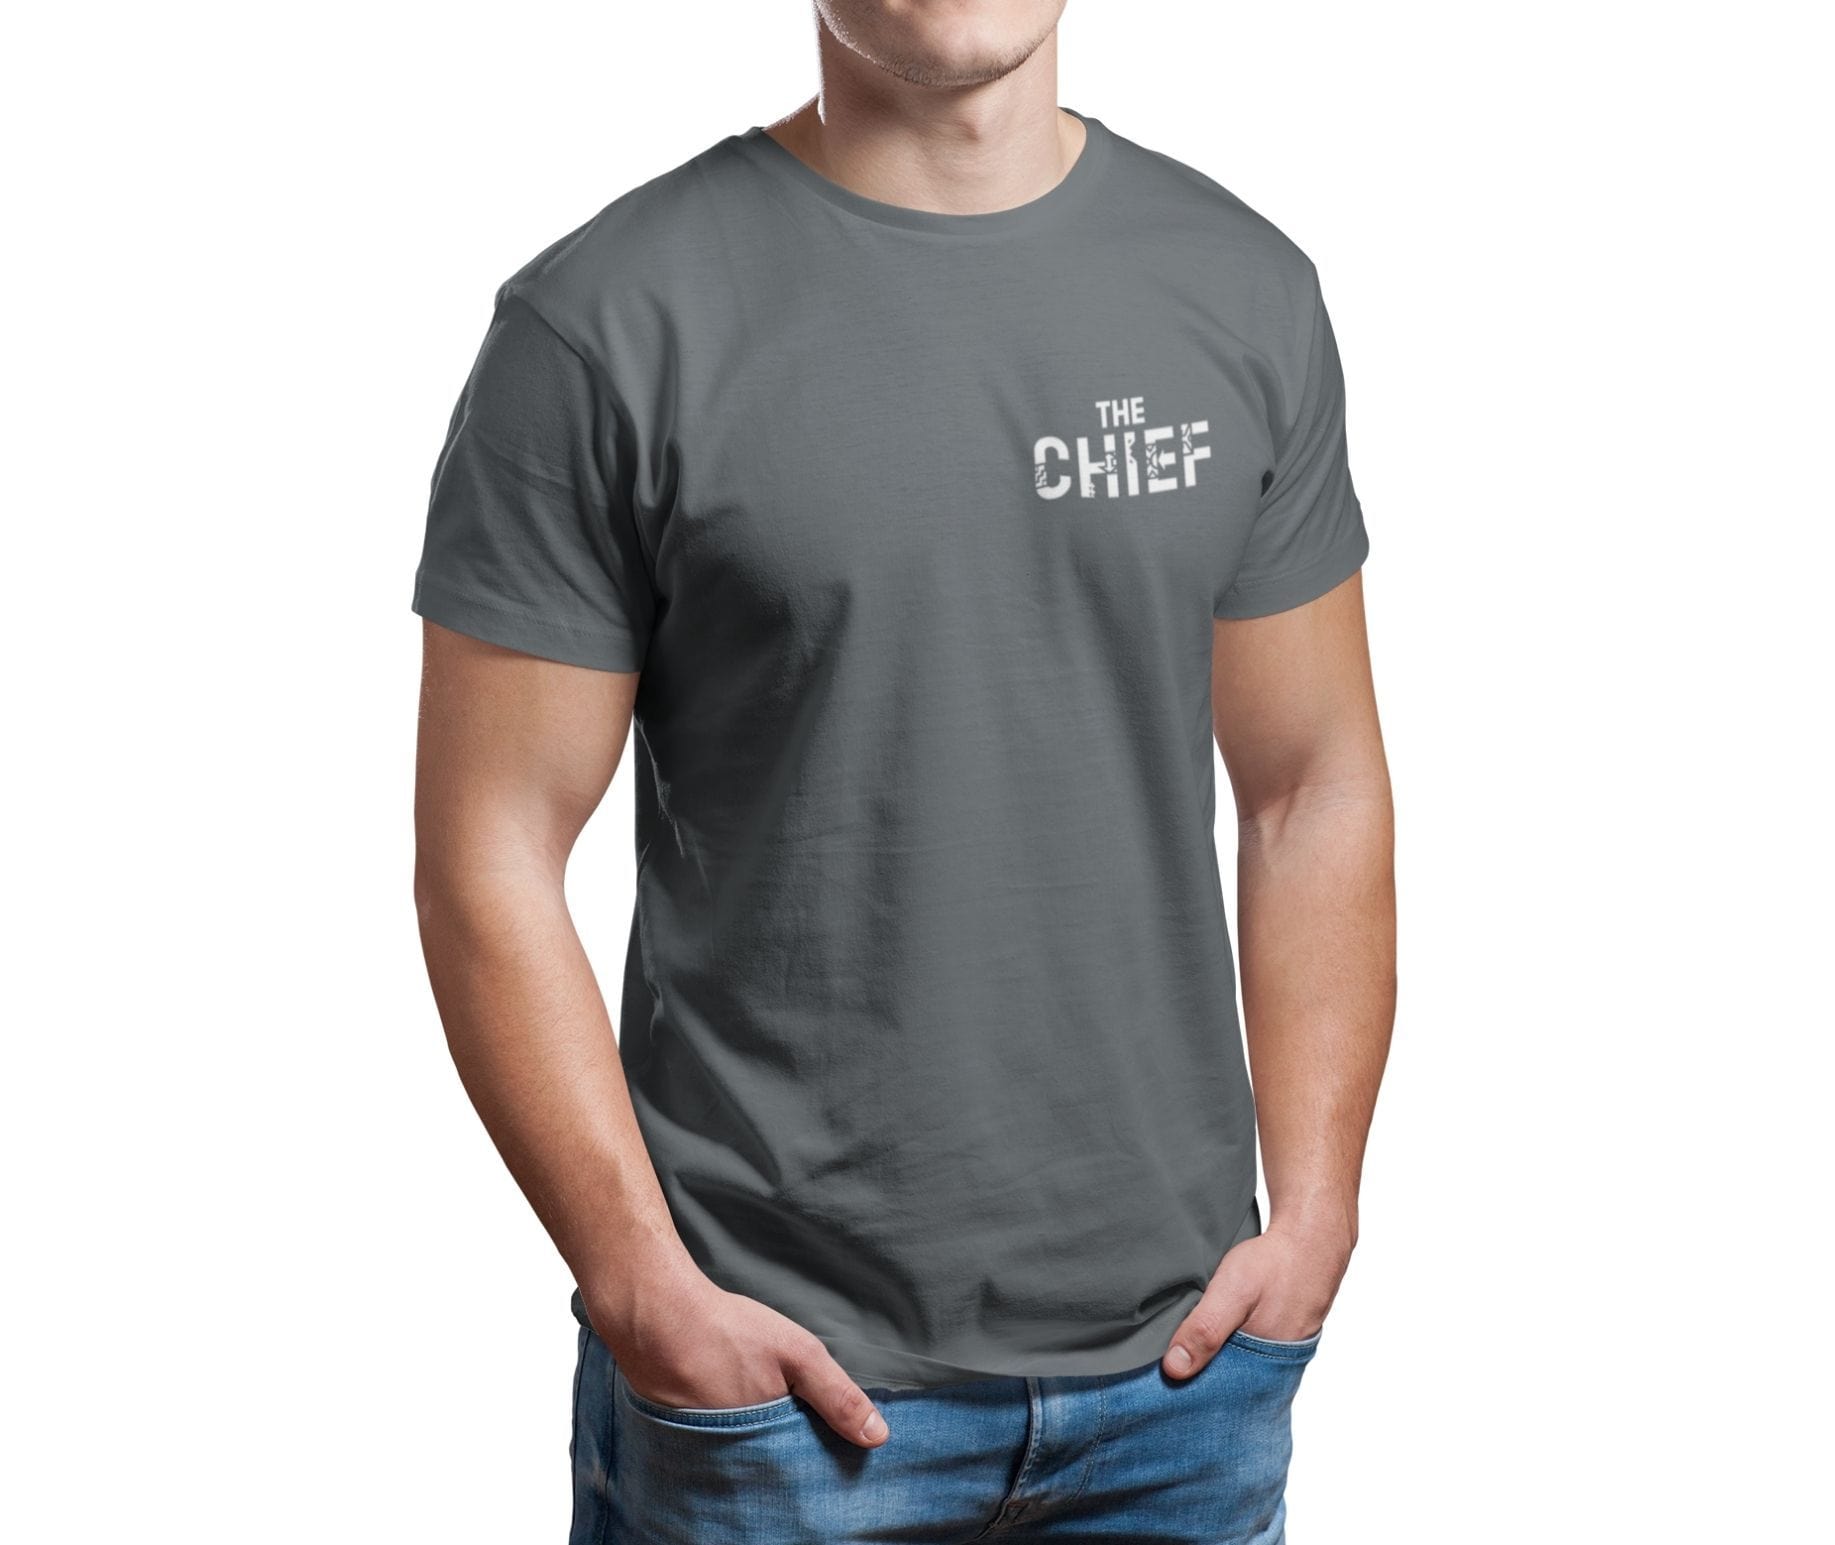 The Chief T-Shirt